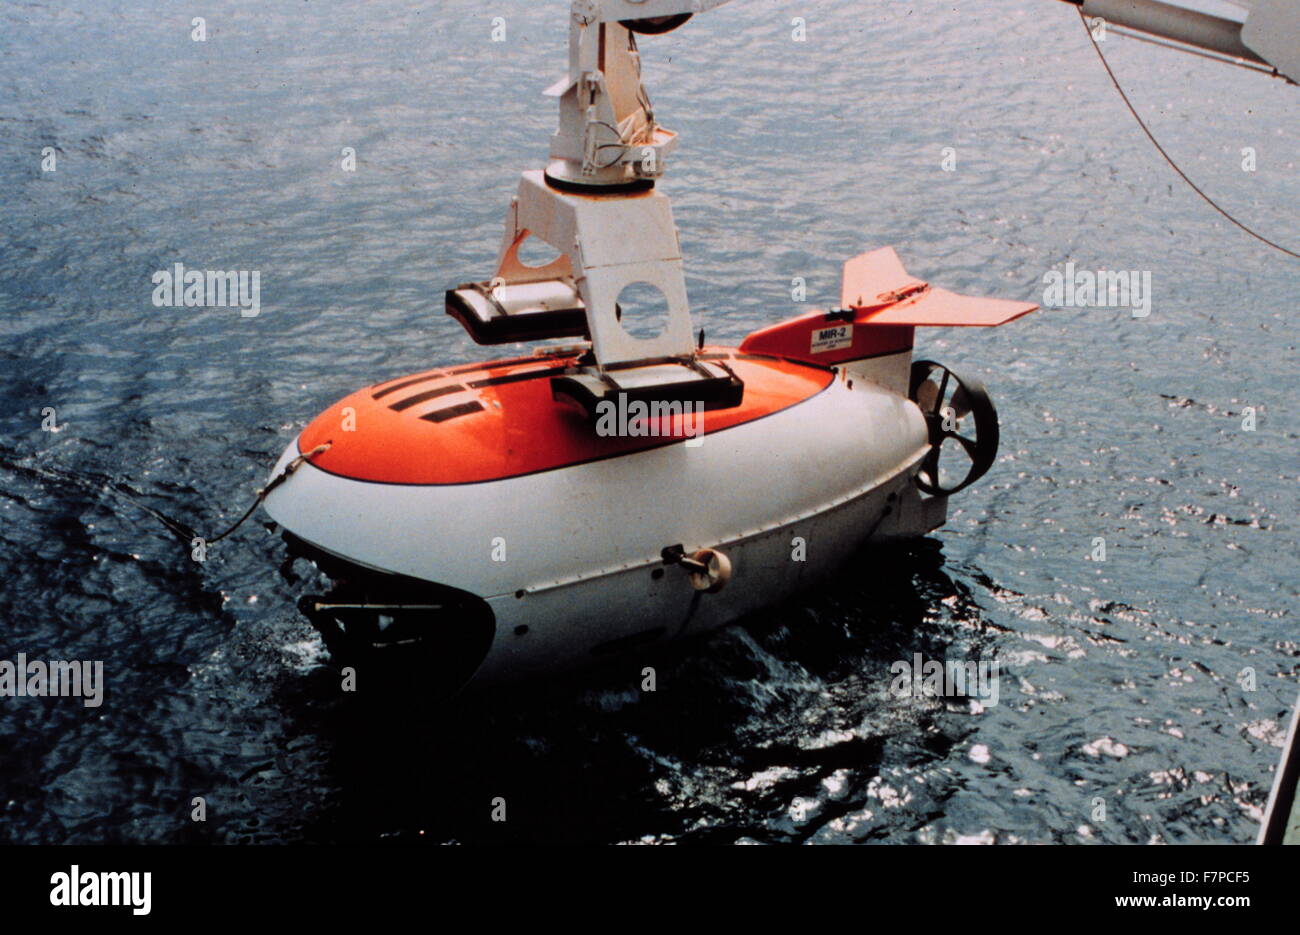 MIR submarine used to film underwater footage appearing in the movie 'Titanic.' 1997 Stock Photo